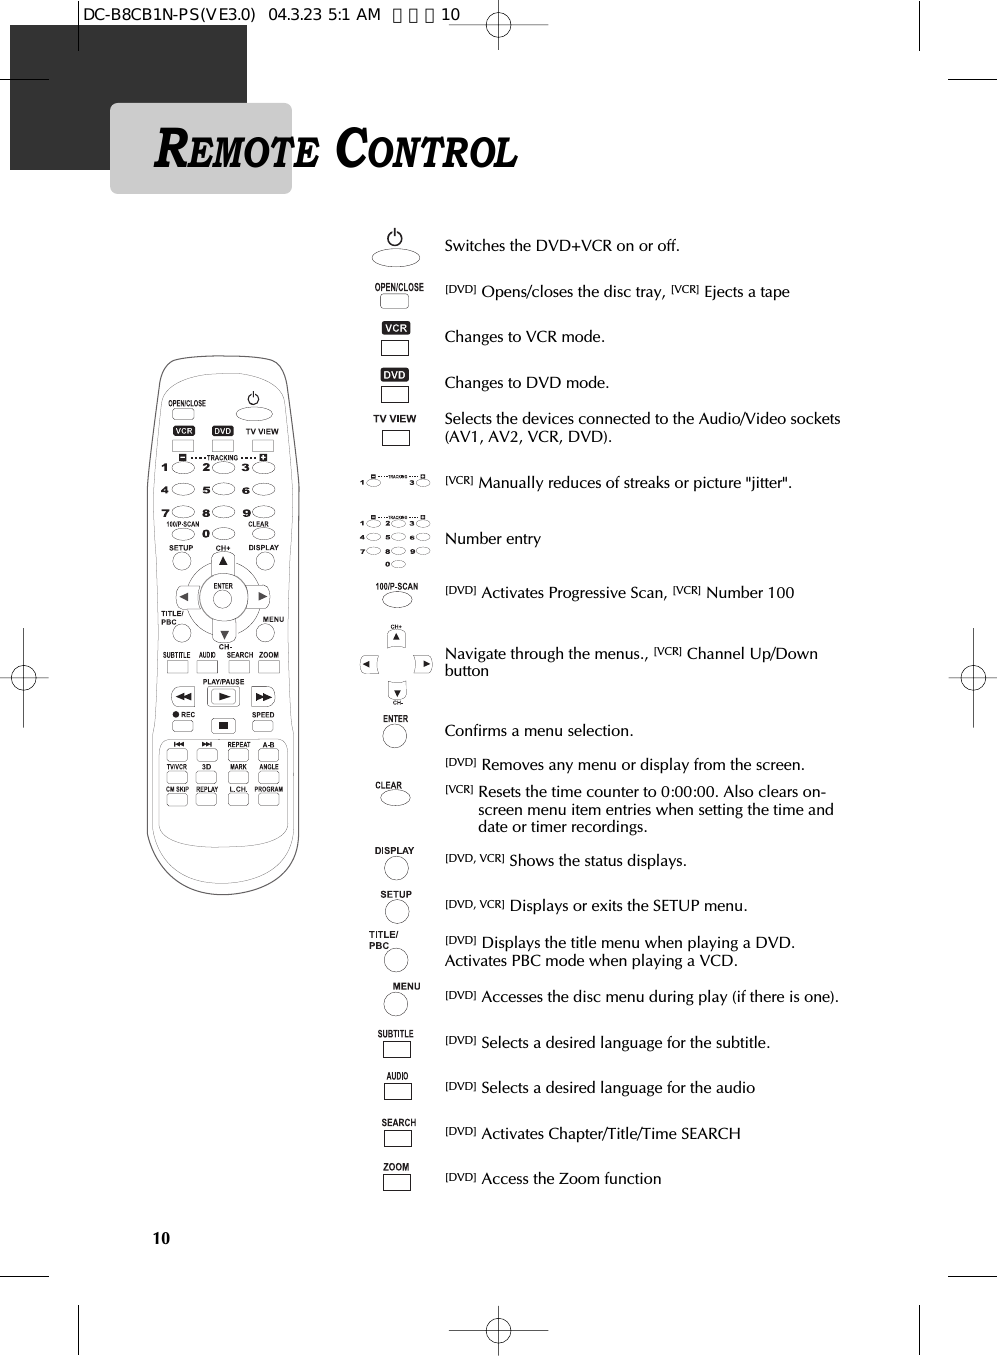 10REMOTE CONTROLSwitches the DVD+VCR on or off.[DVD] Opens/closes the disc tray, [VCR] Ejects a tapeChanges to VCR mode.Changes to DVD mode.Selects the devices connected to the Audio/Video sockets(AV1, AV2, VCR, DVD).Number entry[VCR] Manually reduces of streaks or picture &quot;jitter&quot;.[DVD] Activates Progressive Scan, [VCR] Number 100Navigate through the menus., [VCR] Channel Up/DownbuttonConfirms a menu selection.[DVD] Removes any menu or display from the screen.[VCR] Resets the time counter to 0:00:00. Also clears on-screen menu item entries when setting the time anddate or timer recordings.[DVD, VCR] Shows the status displays.[DVD, VCR] Displays or exits the SETUP menu.[DVD] Displays the title menu when playing a DVD.Activates PBC mode when playing a VCD.[DVD] Accesses the disc menu during play (if there is one).[DVD] Selects a desired language for the subtitle.[DVD] Selects a desired language for the audio[DVD] Activates Chapter/Title/Time SEARCH[DVD] Access the Zoom functionDC-B8CB1N-PS(VE3.0)  04.3.23 5:1 AM  페이지10